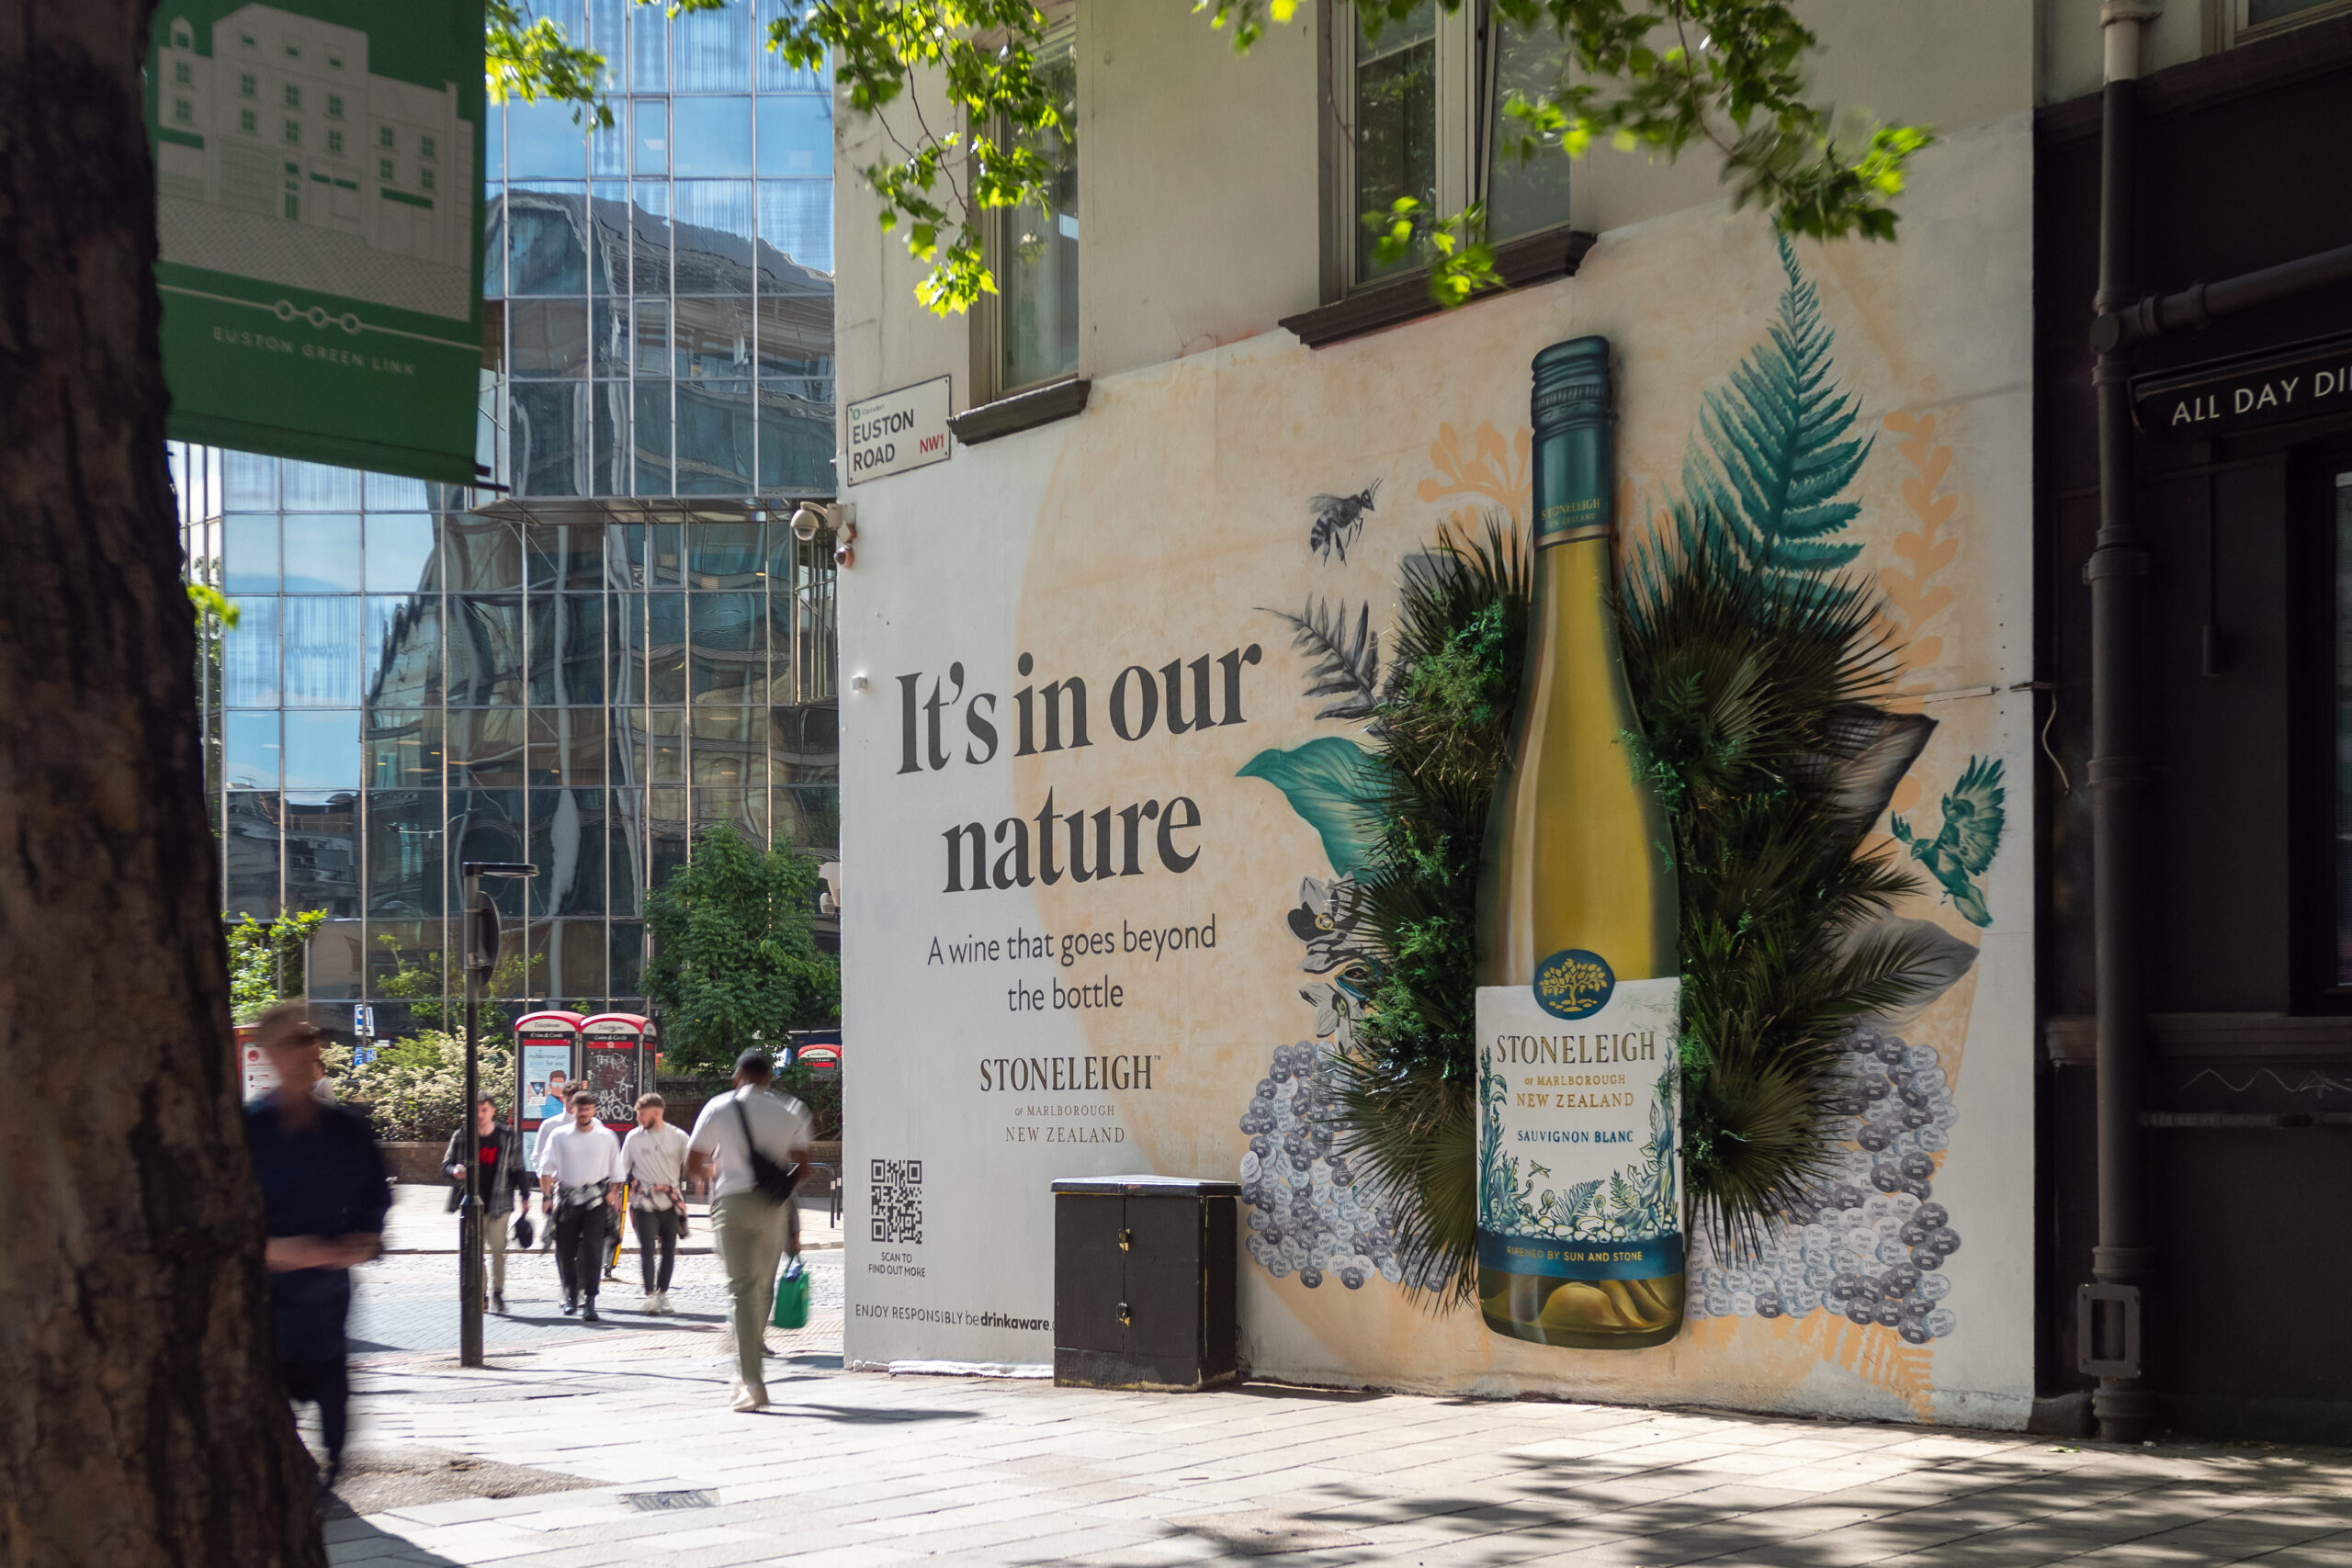 A large billboard with wine advert and preserved foliage